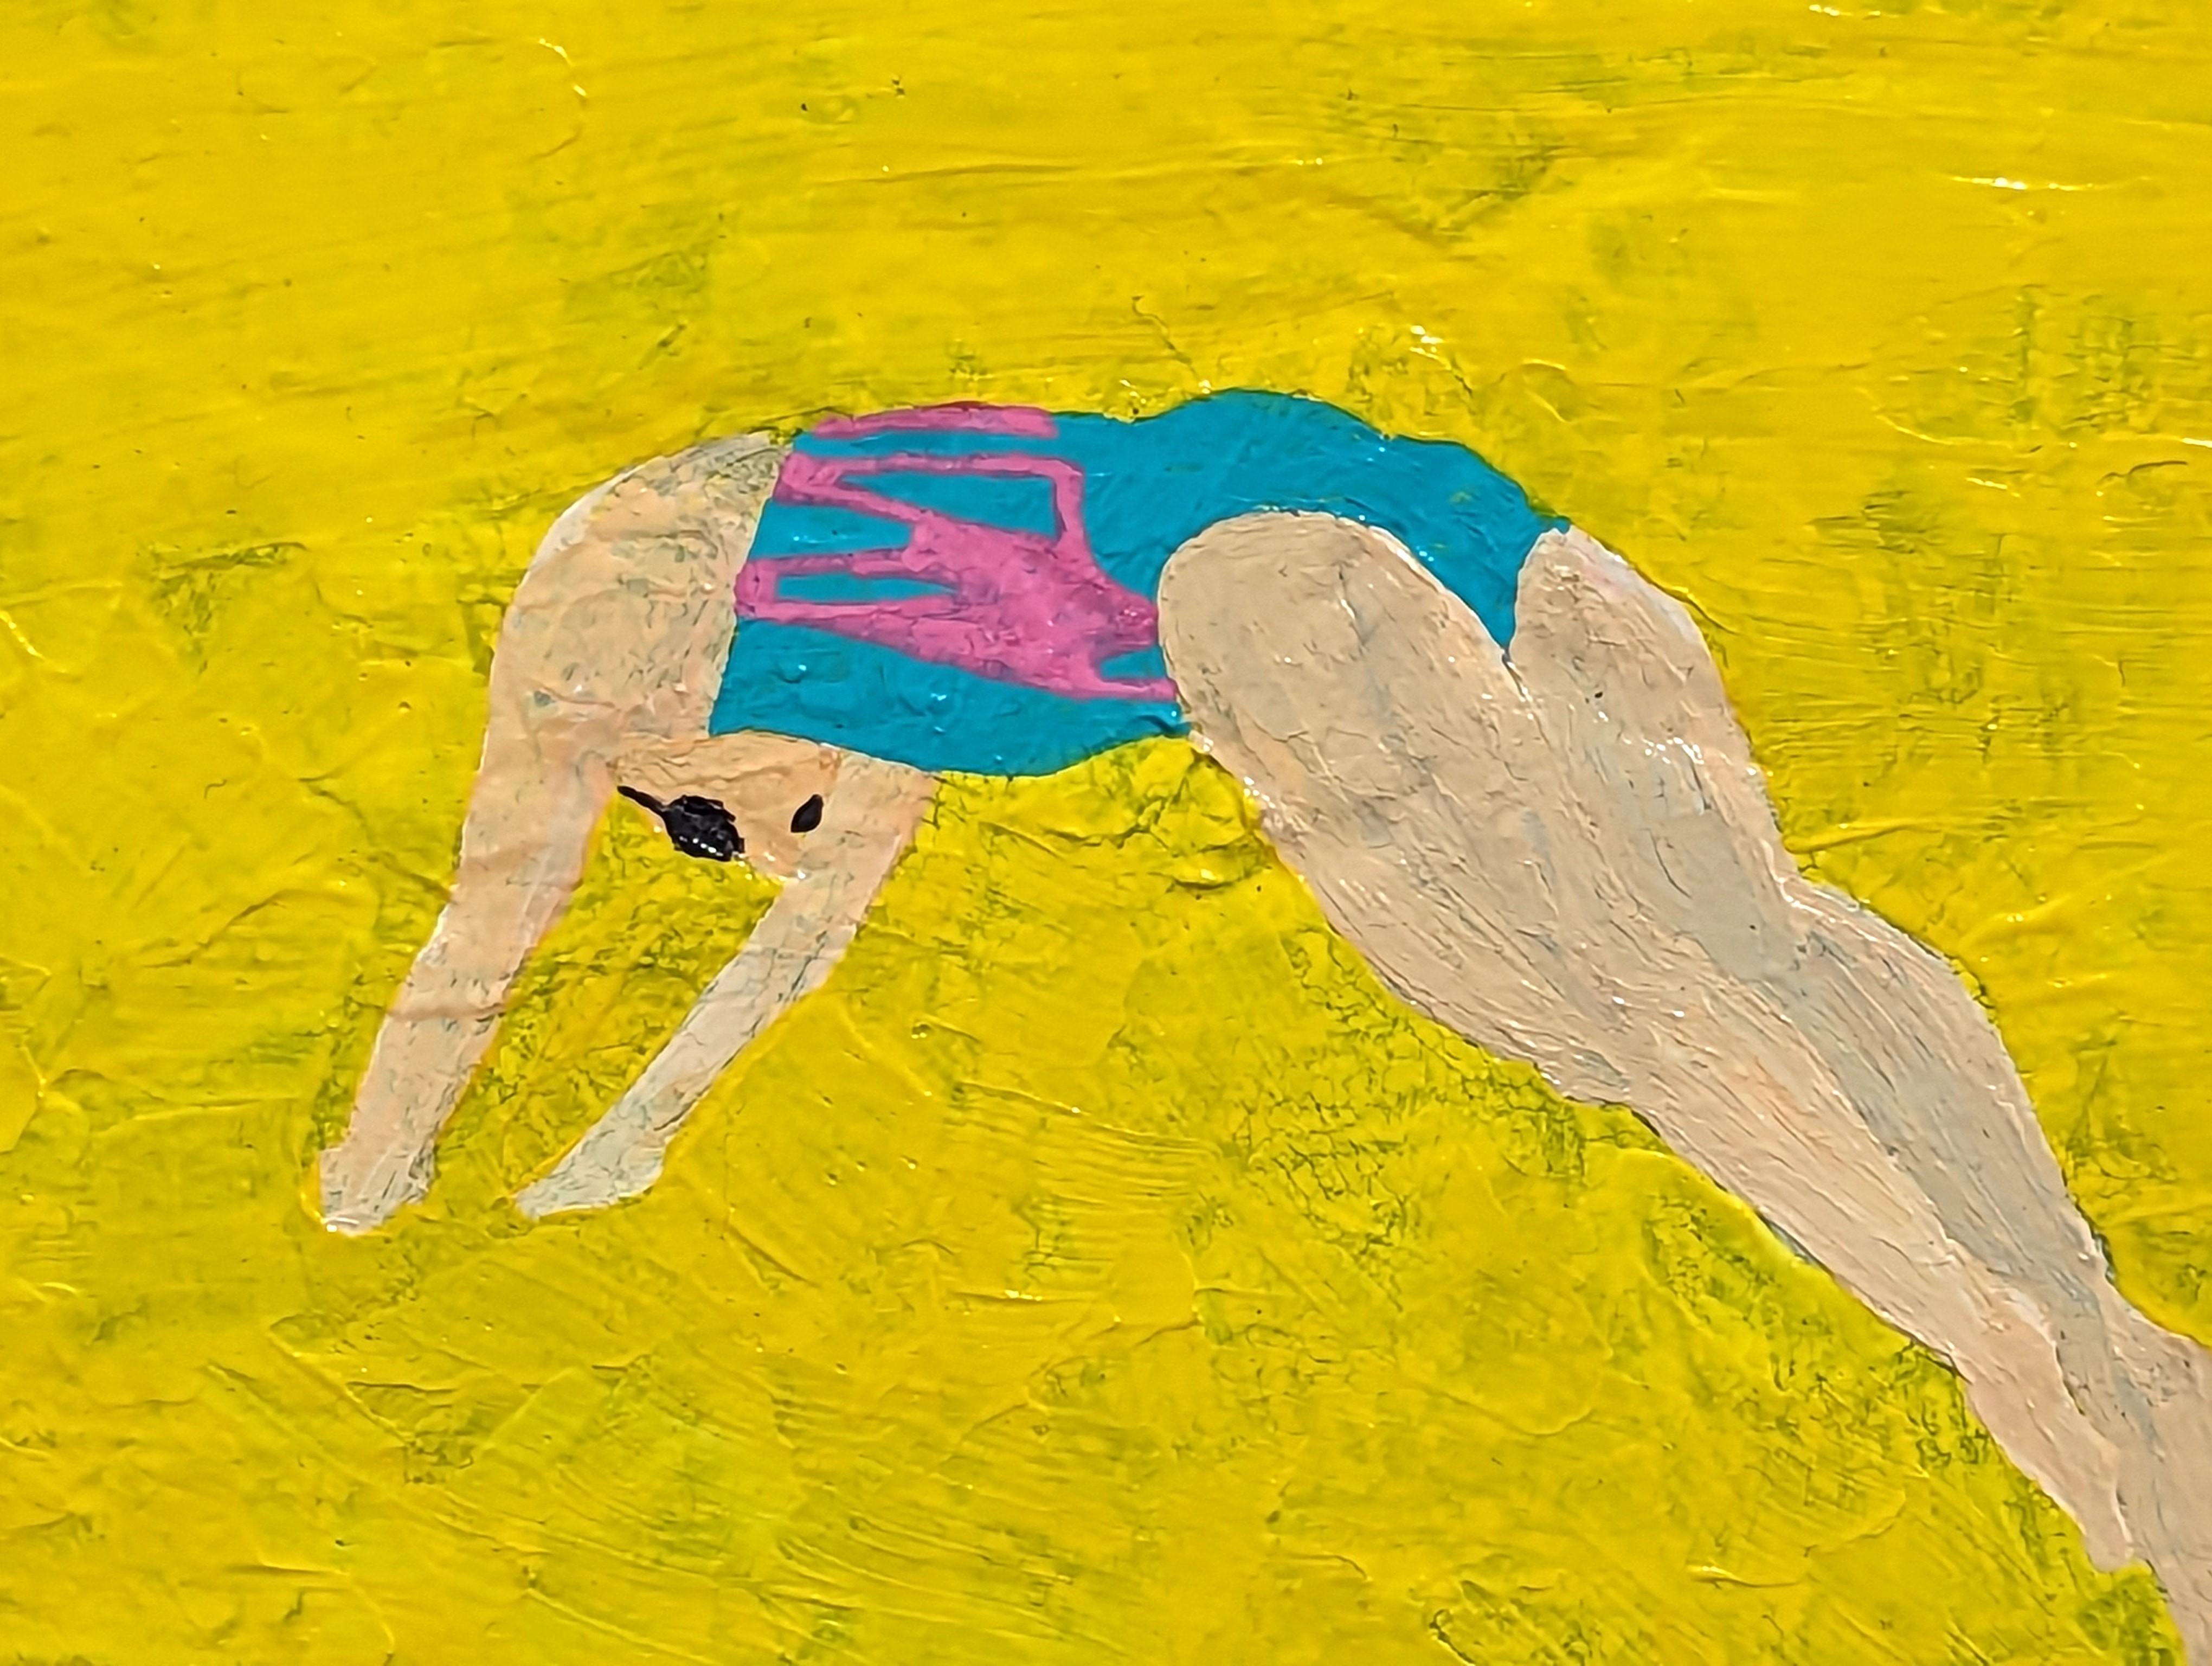 “Diving into a pool of hot piss” Colorful Contemporary Dark Humor Painting For Sale 5